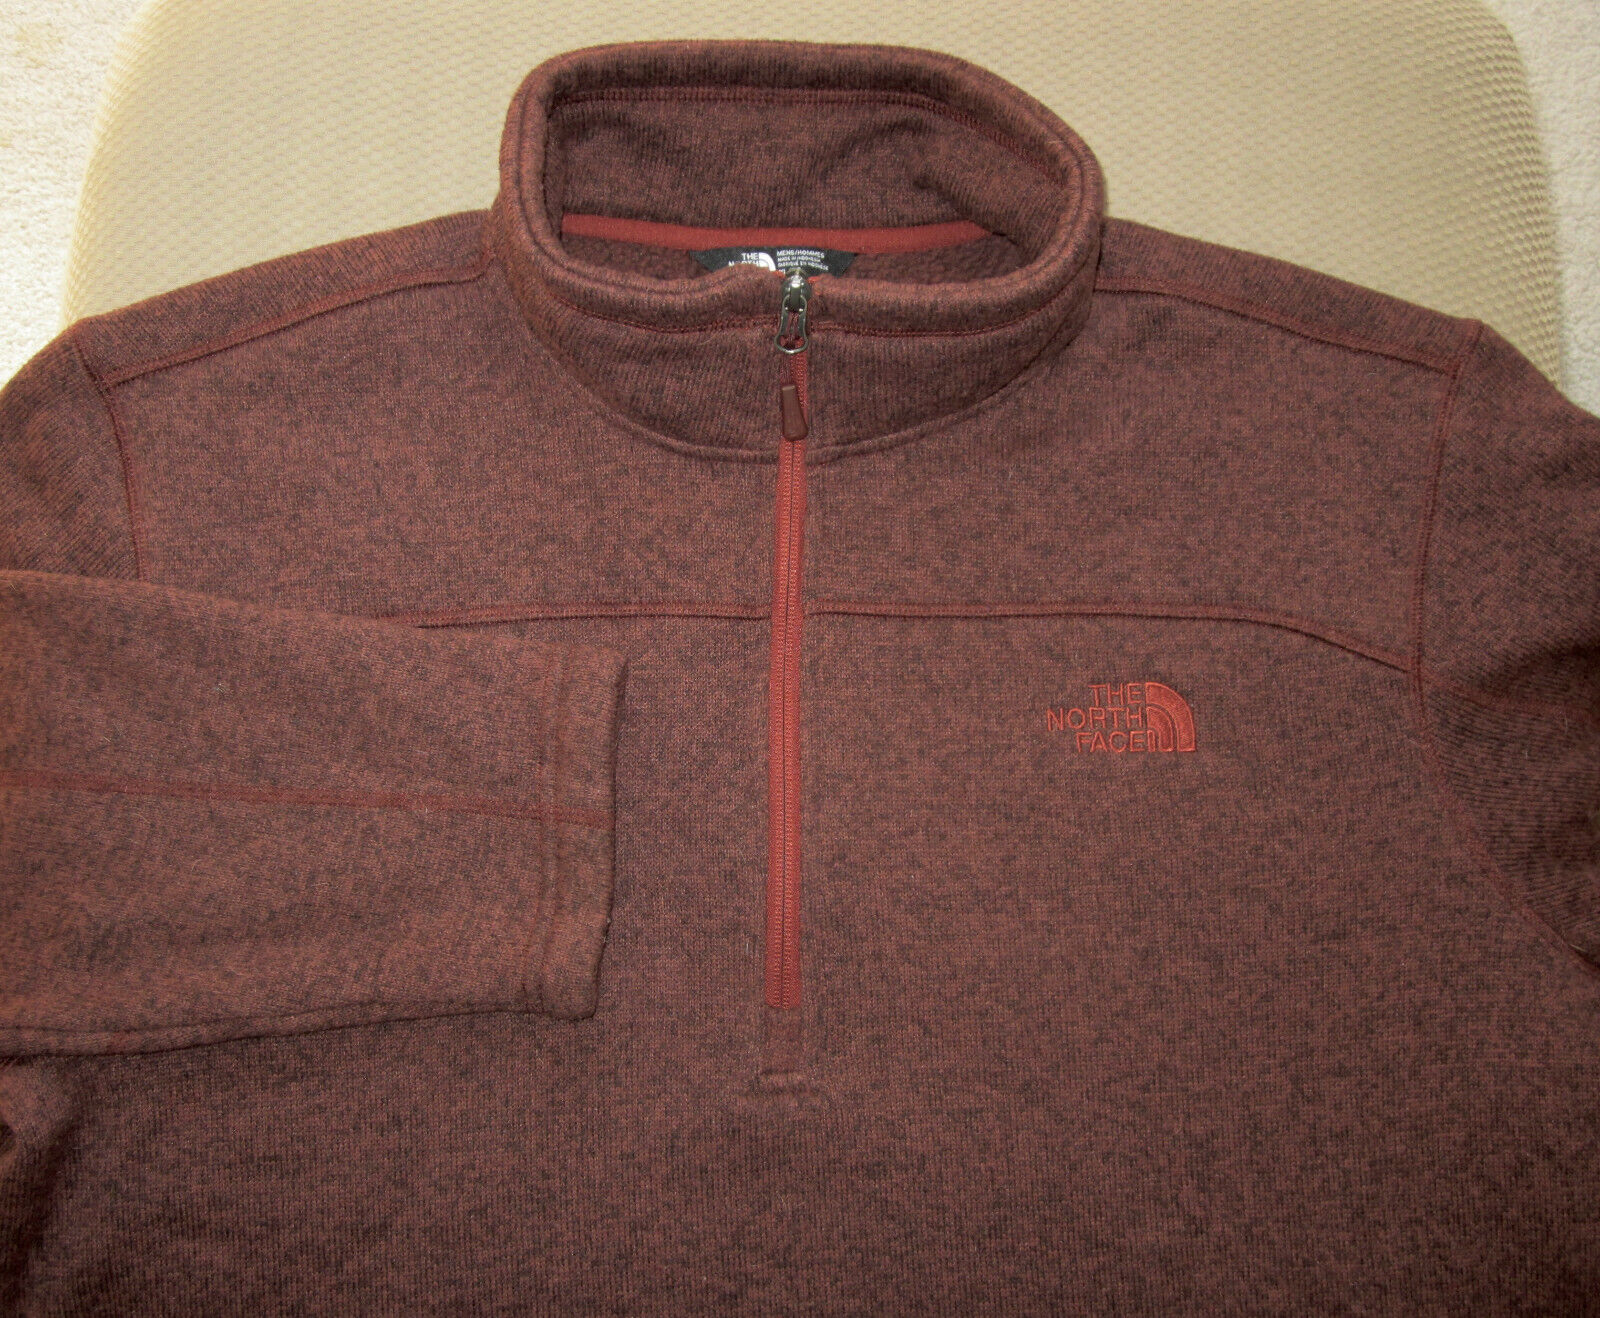 MINT $90 THE NORTH FACE MAROON 1/2 ZIP PULLOVER SWEATSHIRT MENS X-LARGE